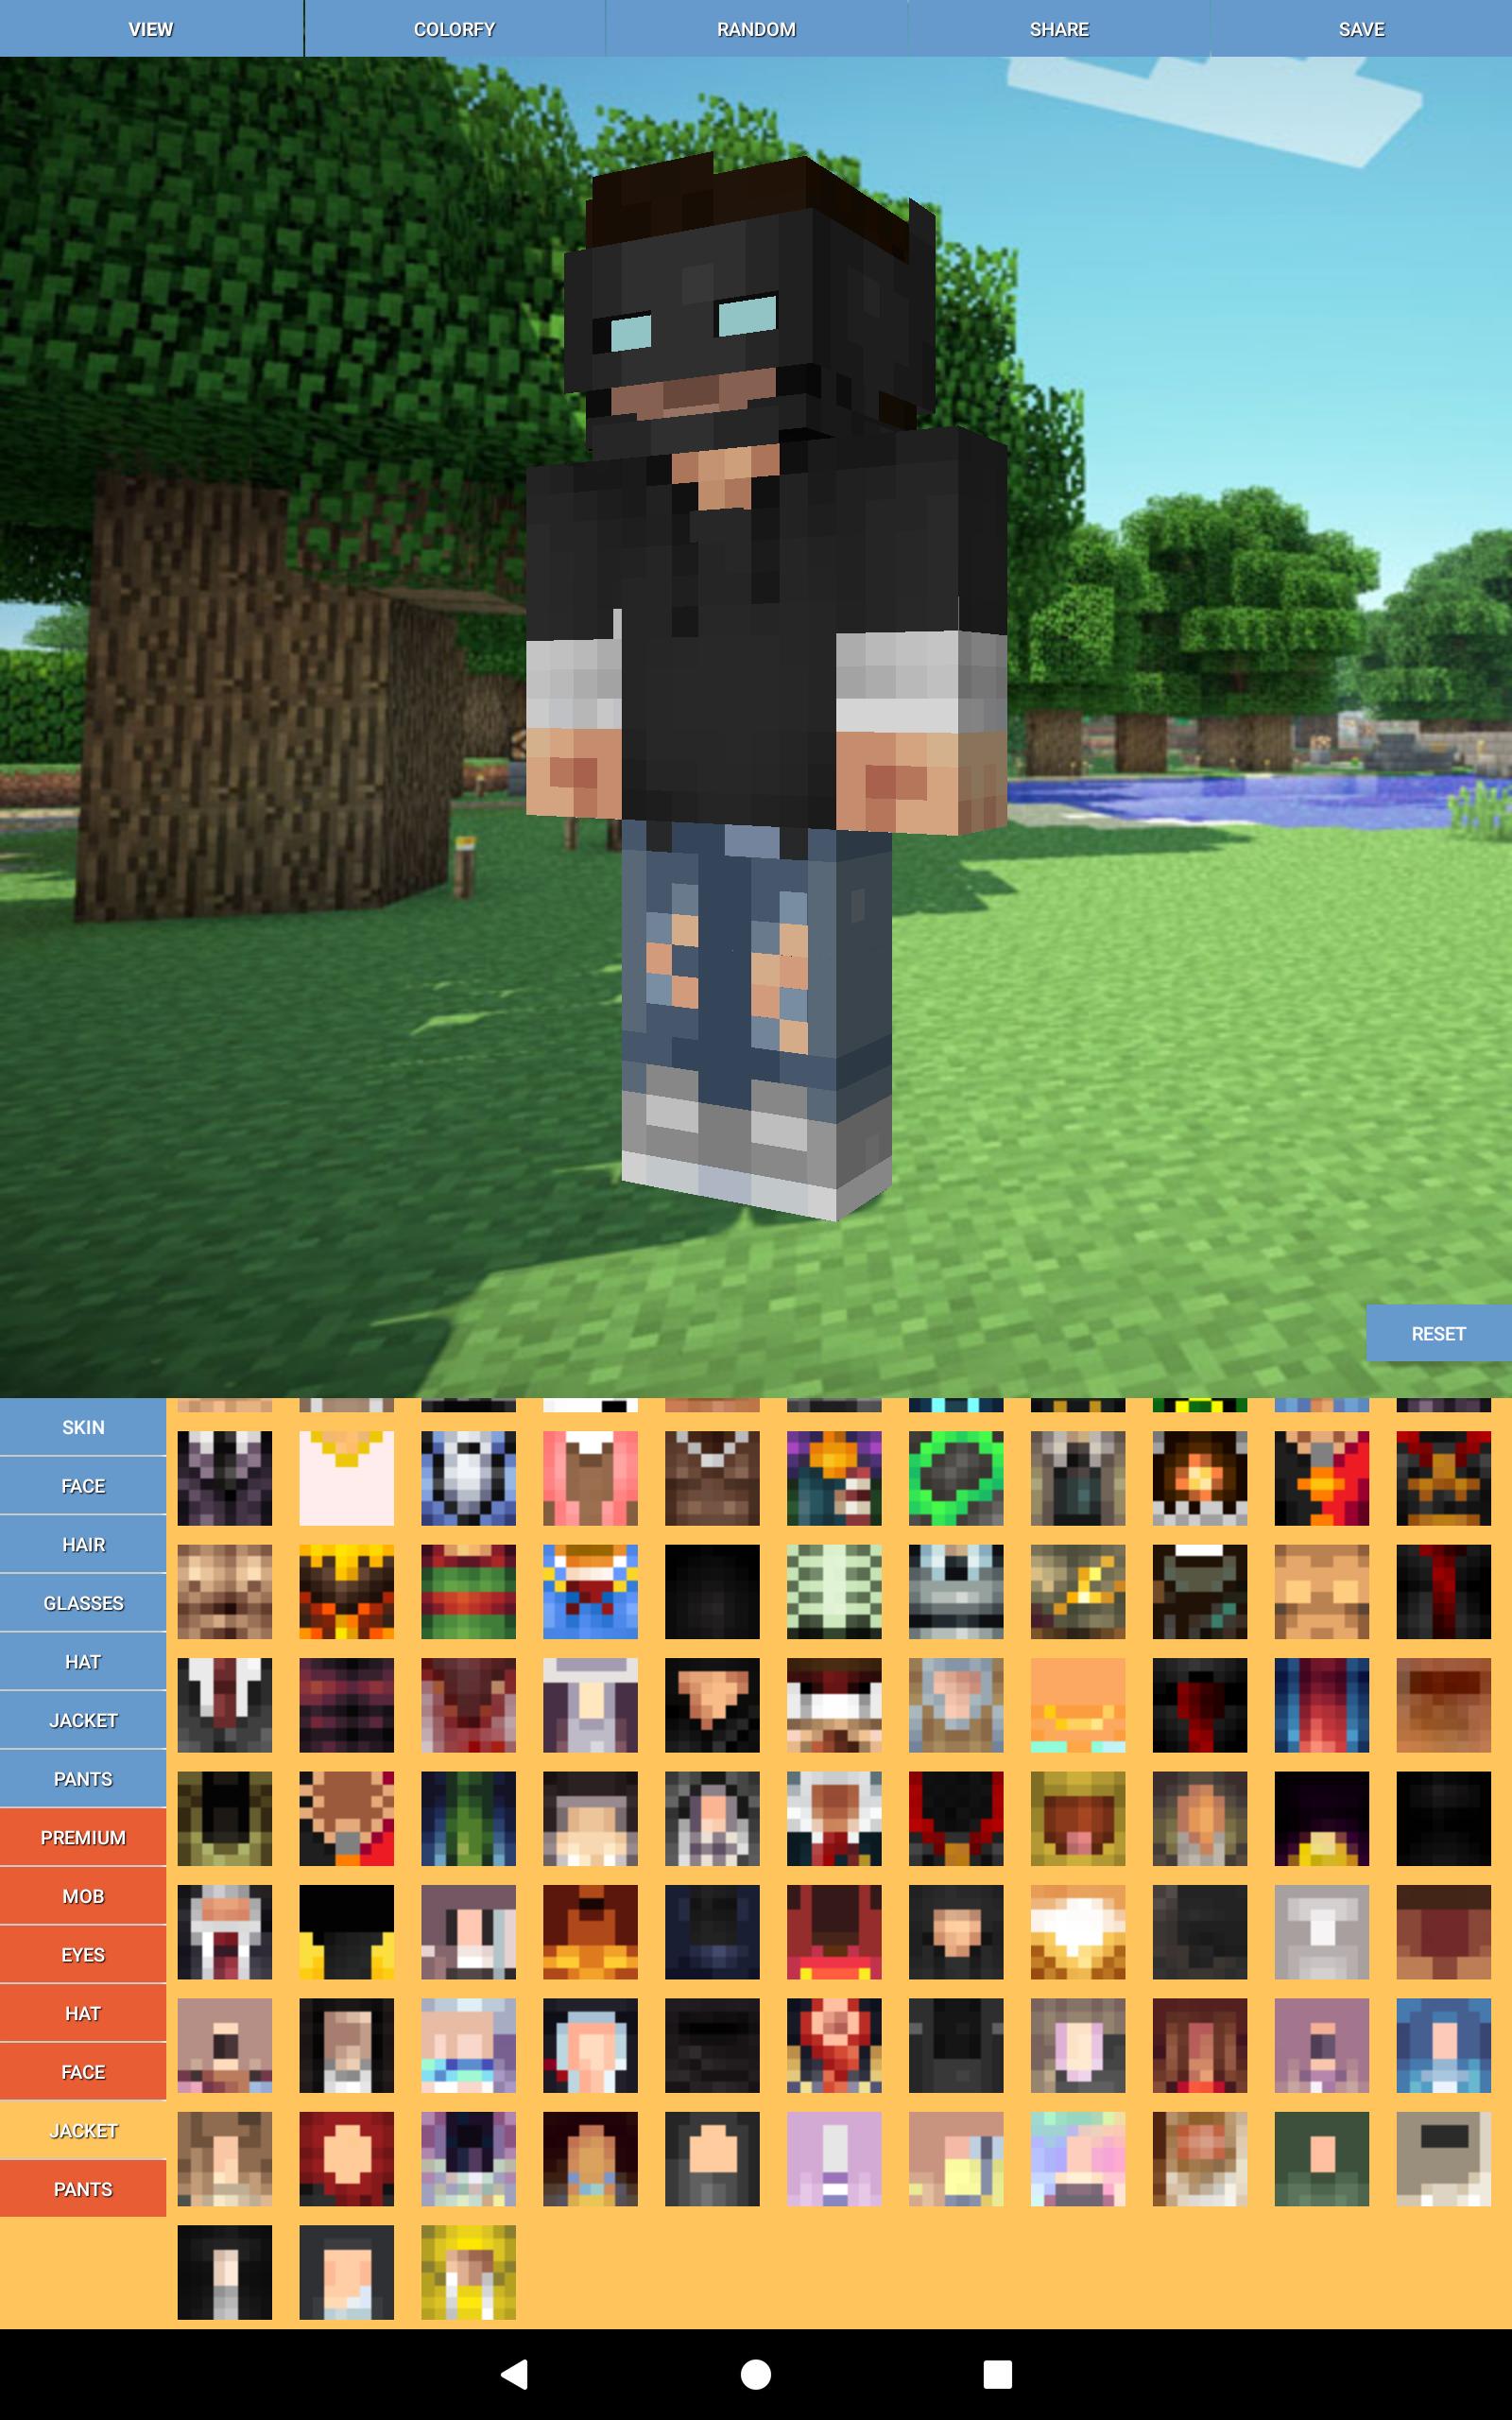 Custom Skin Editor Minecraft for Android APK Download